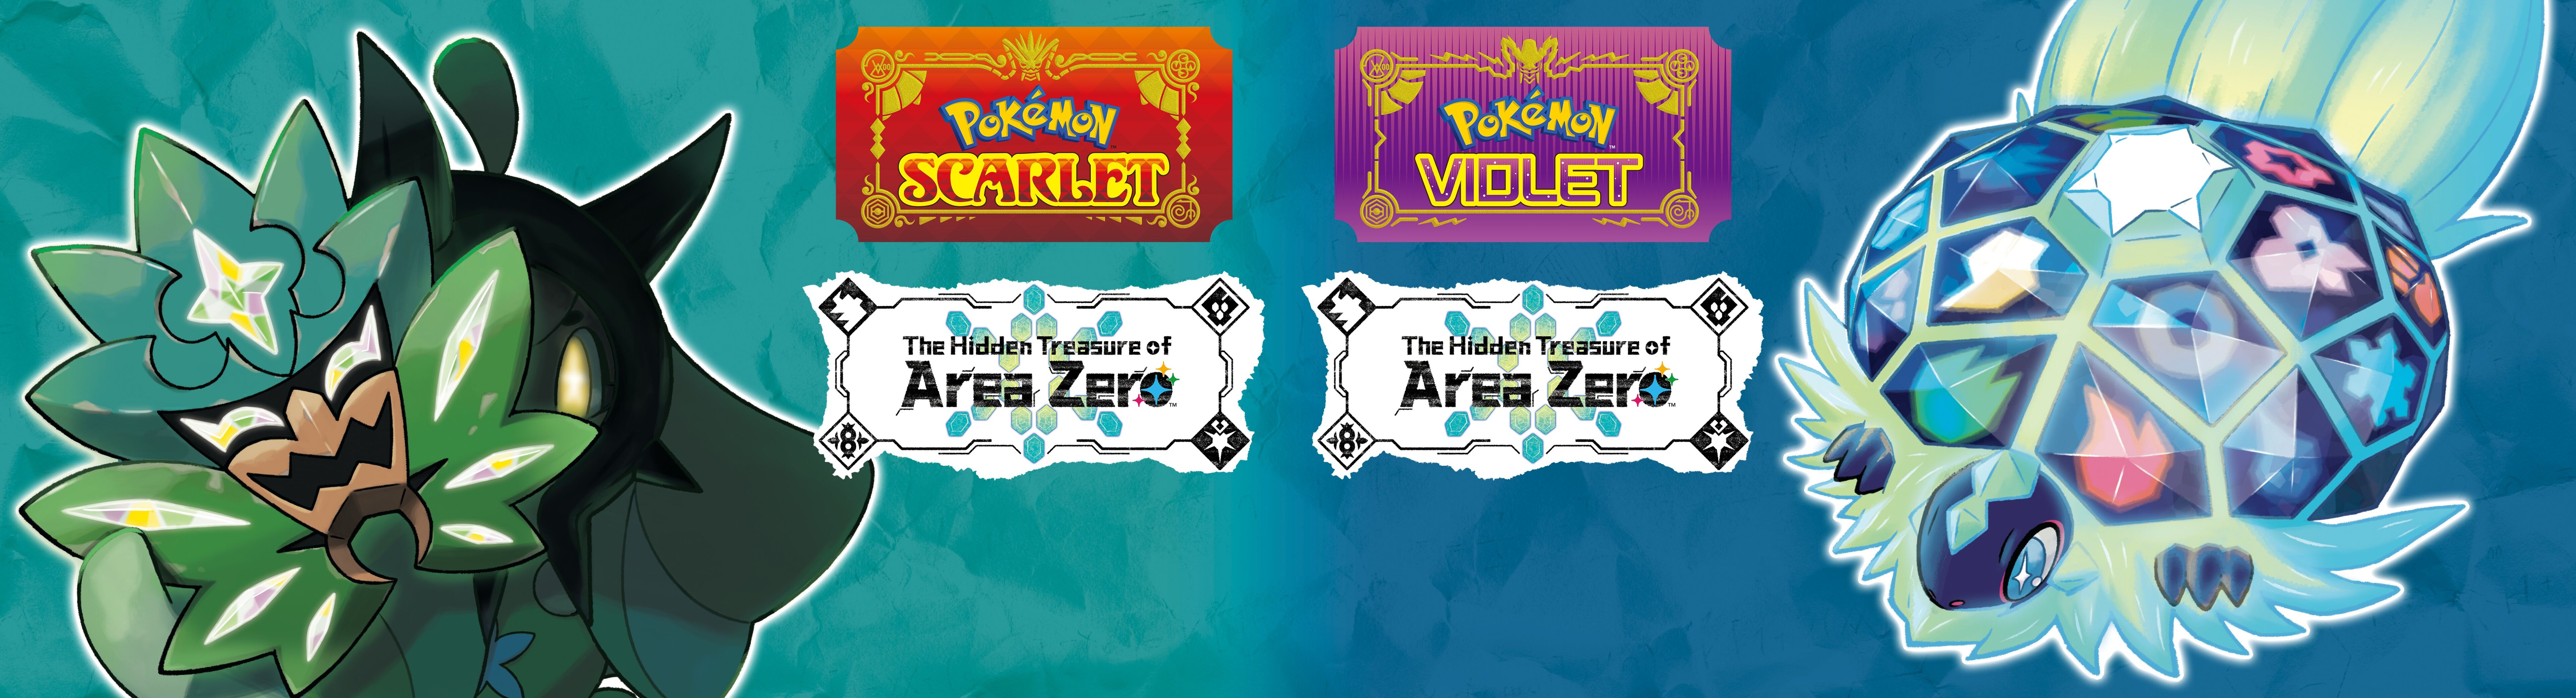 Download Pokémon Scarlet NSP, XCI ROM + v3.0.0 Update + The Hidden Treasure  of Area Zero (Part 1: The Teal Mask)